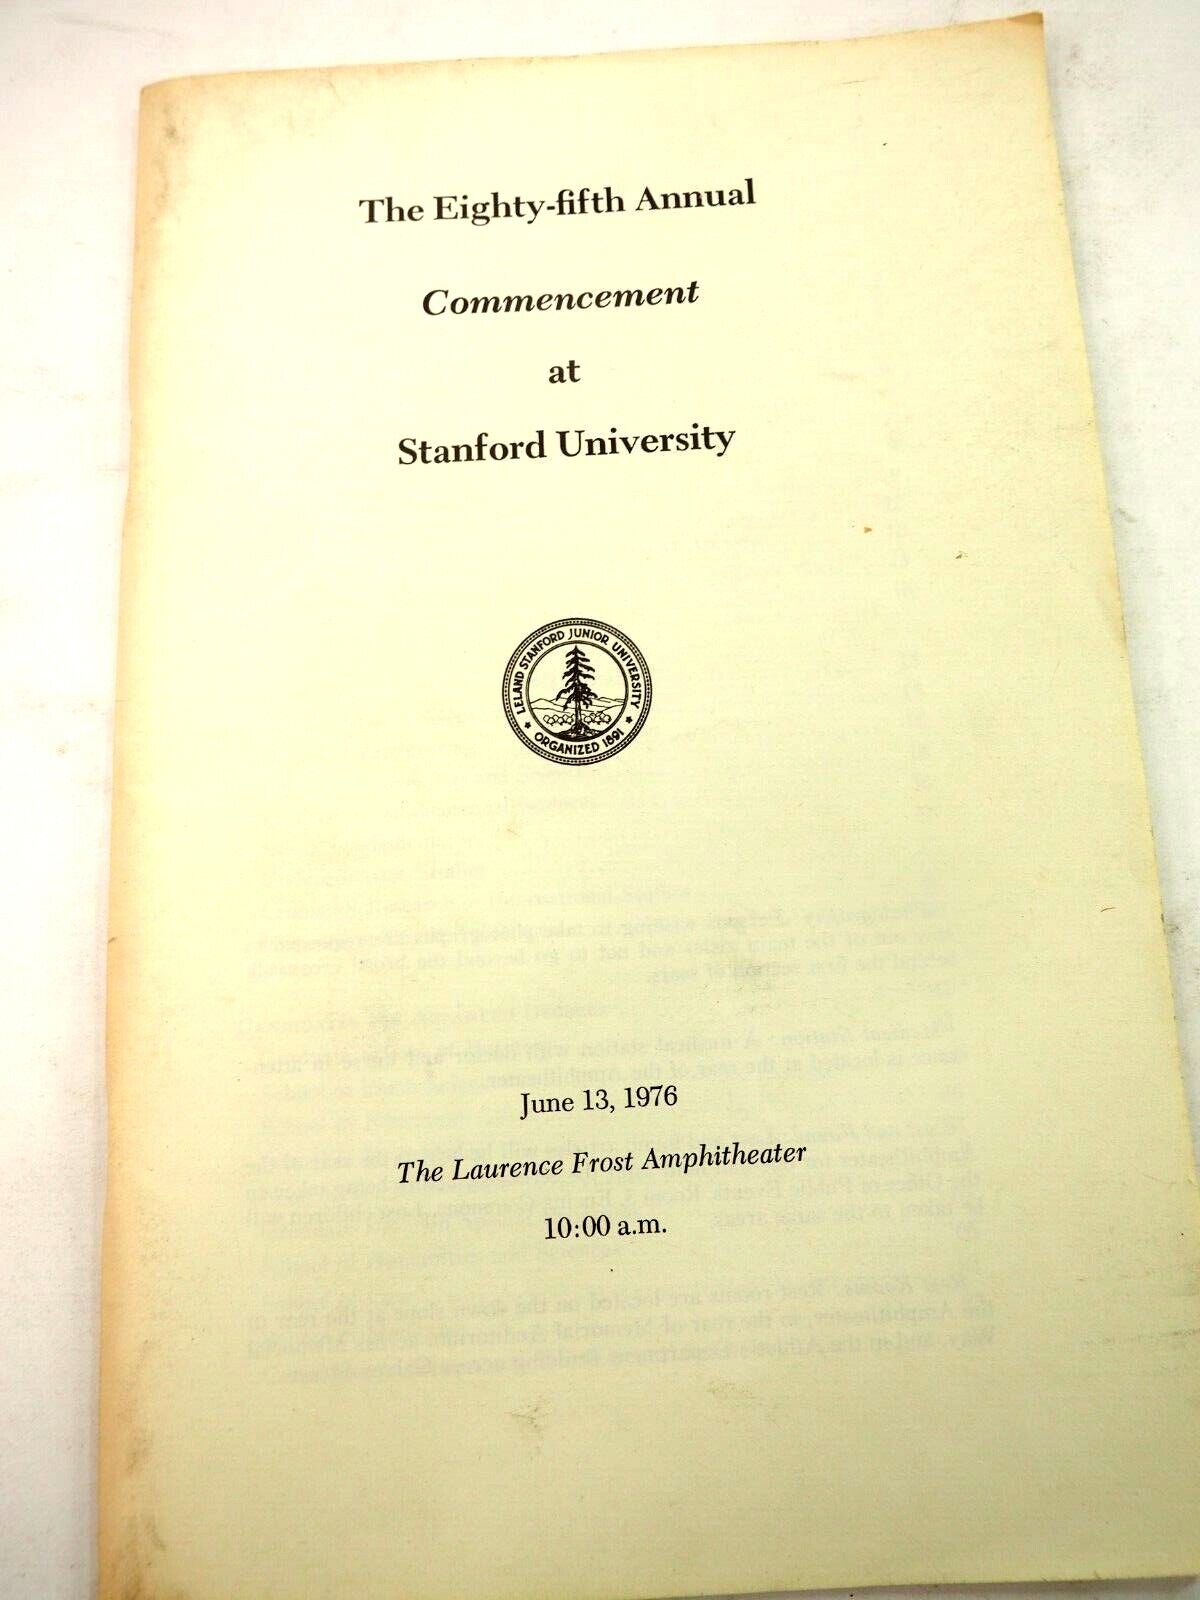 The Eighty Fifth Annual Commencement at Stanford University 1976 Program